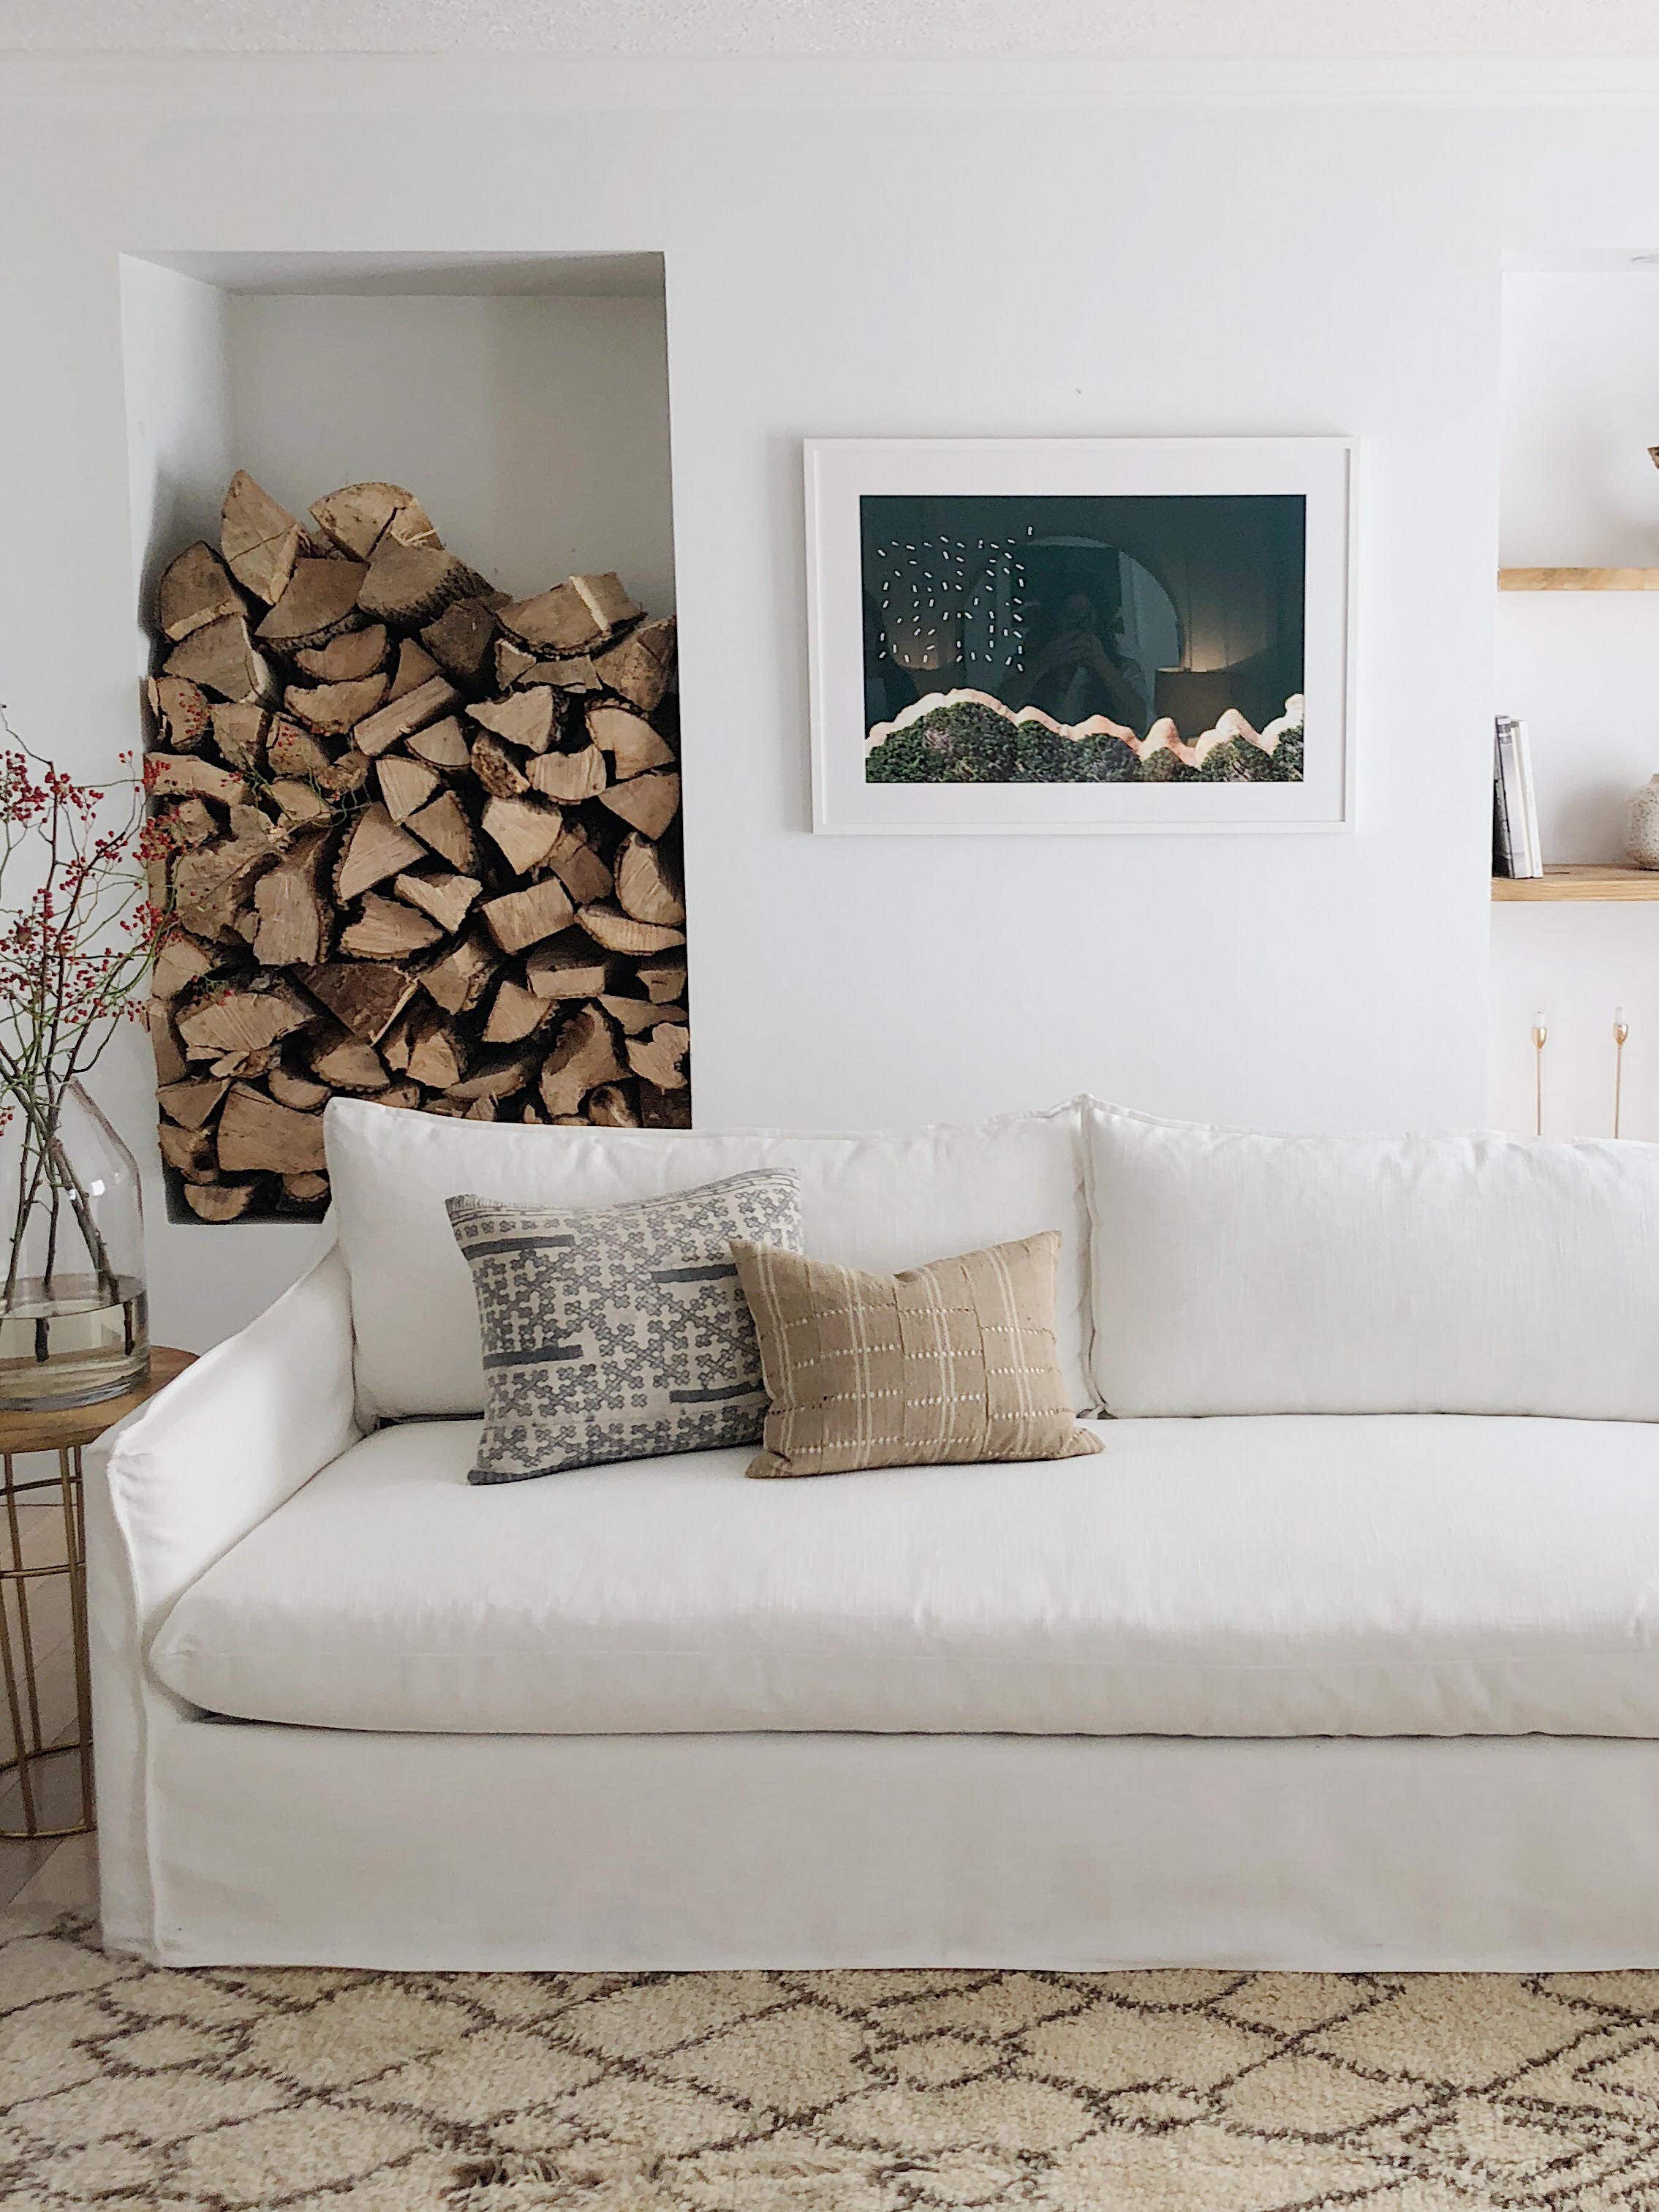 Are Millennials Reviving This “Outdated” Sofa Style?